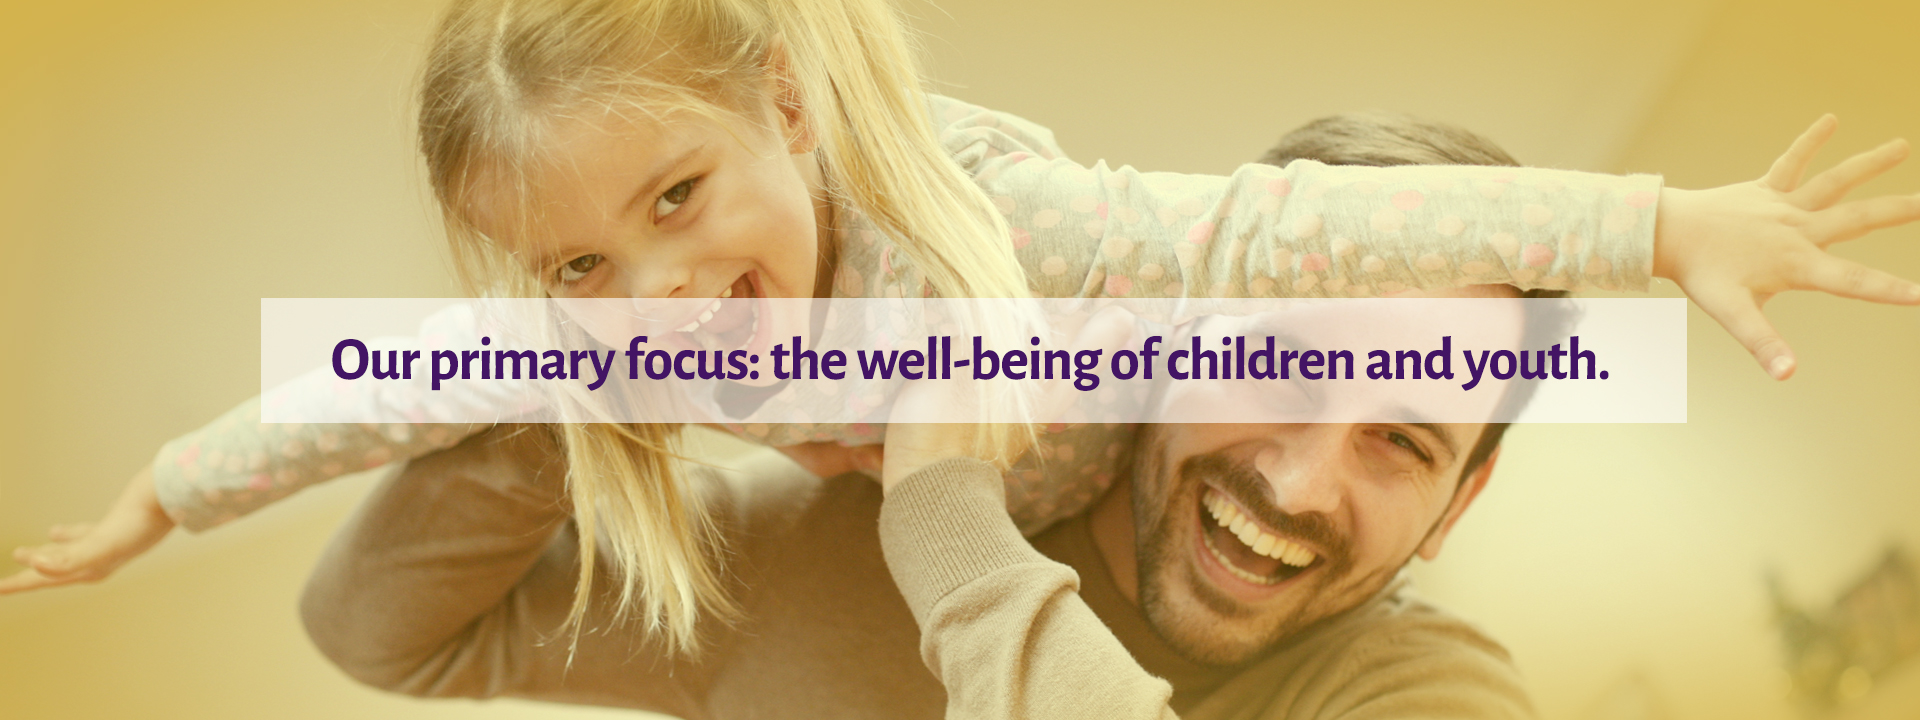 The safety and well-being of children & youth are our main focus.